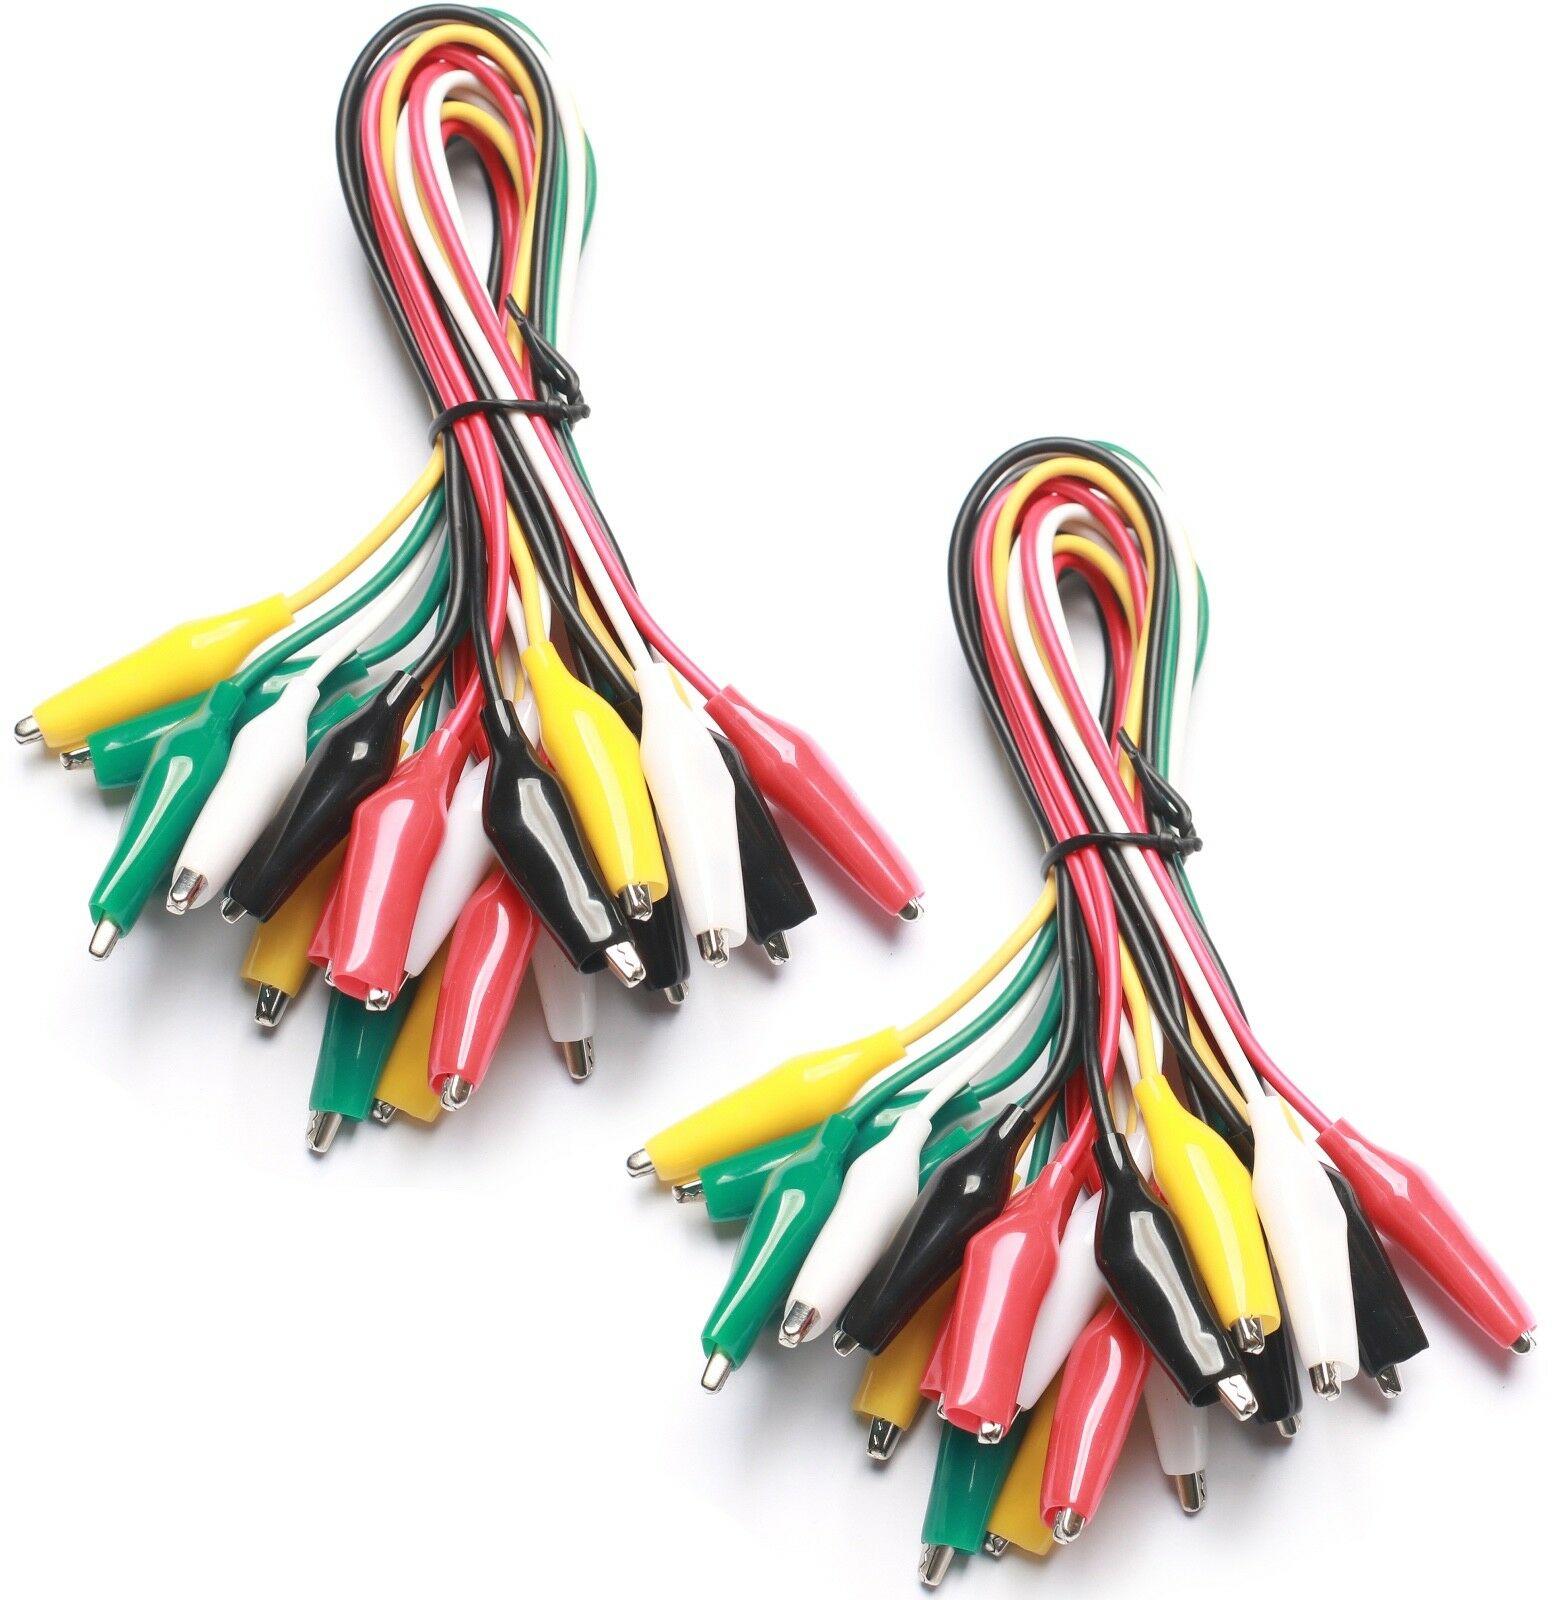 Wgge Wg-026 20 Pieces And 5 Colors Test Lead Set & Alligator Clips,20.5 Inches